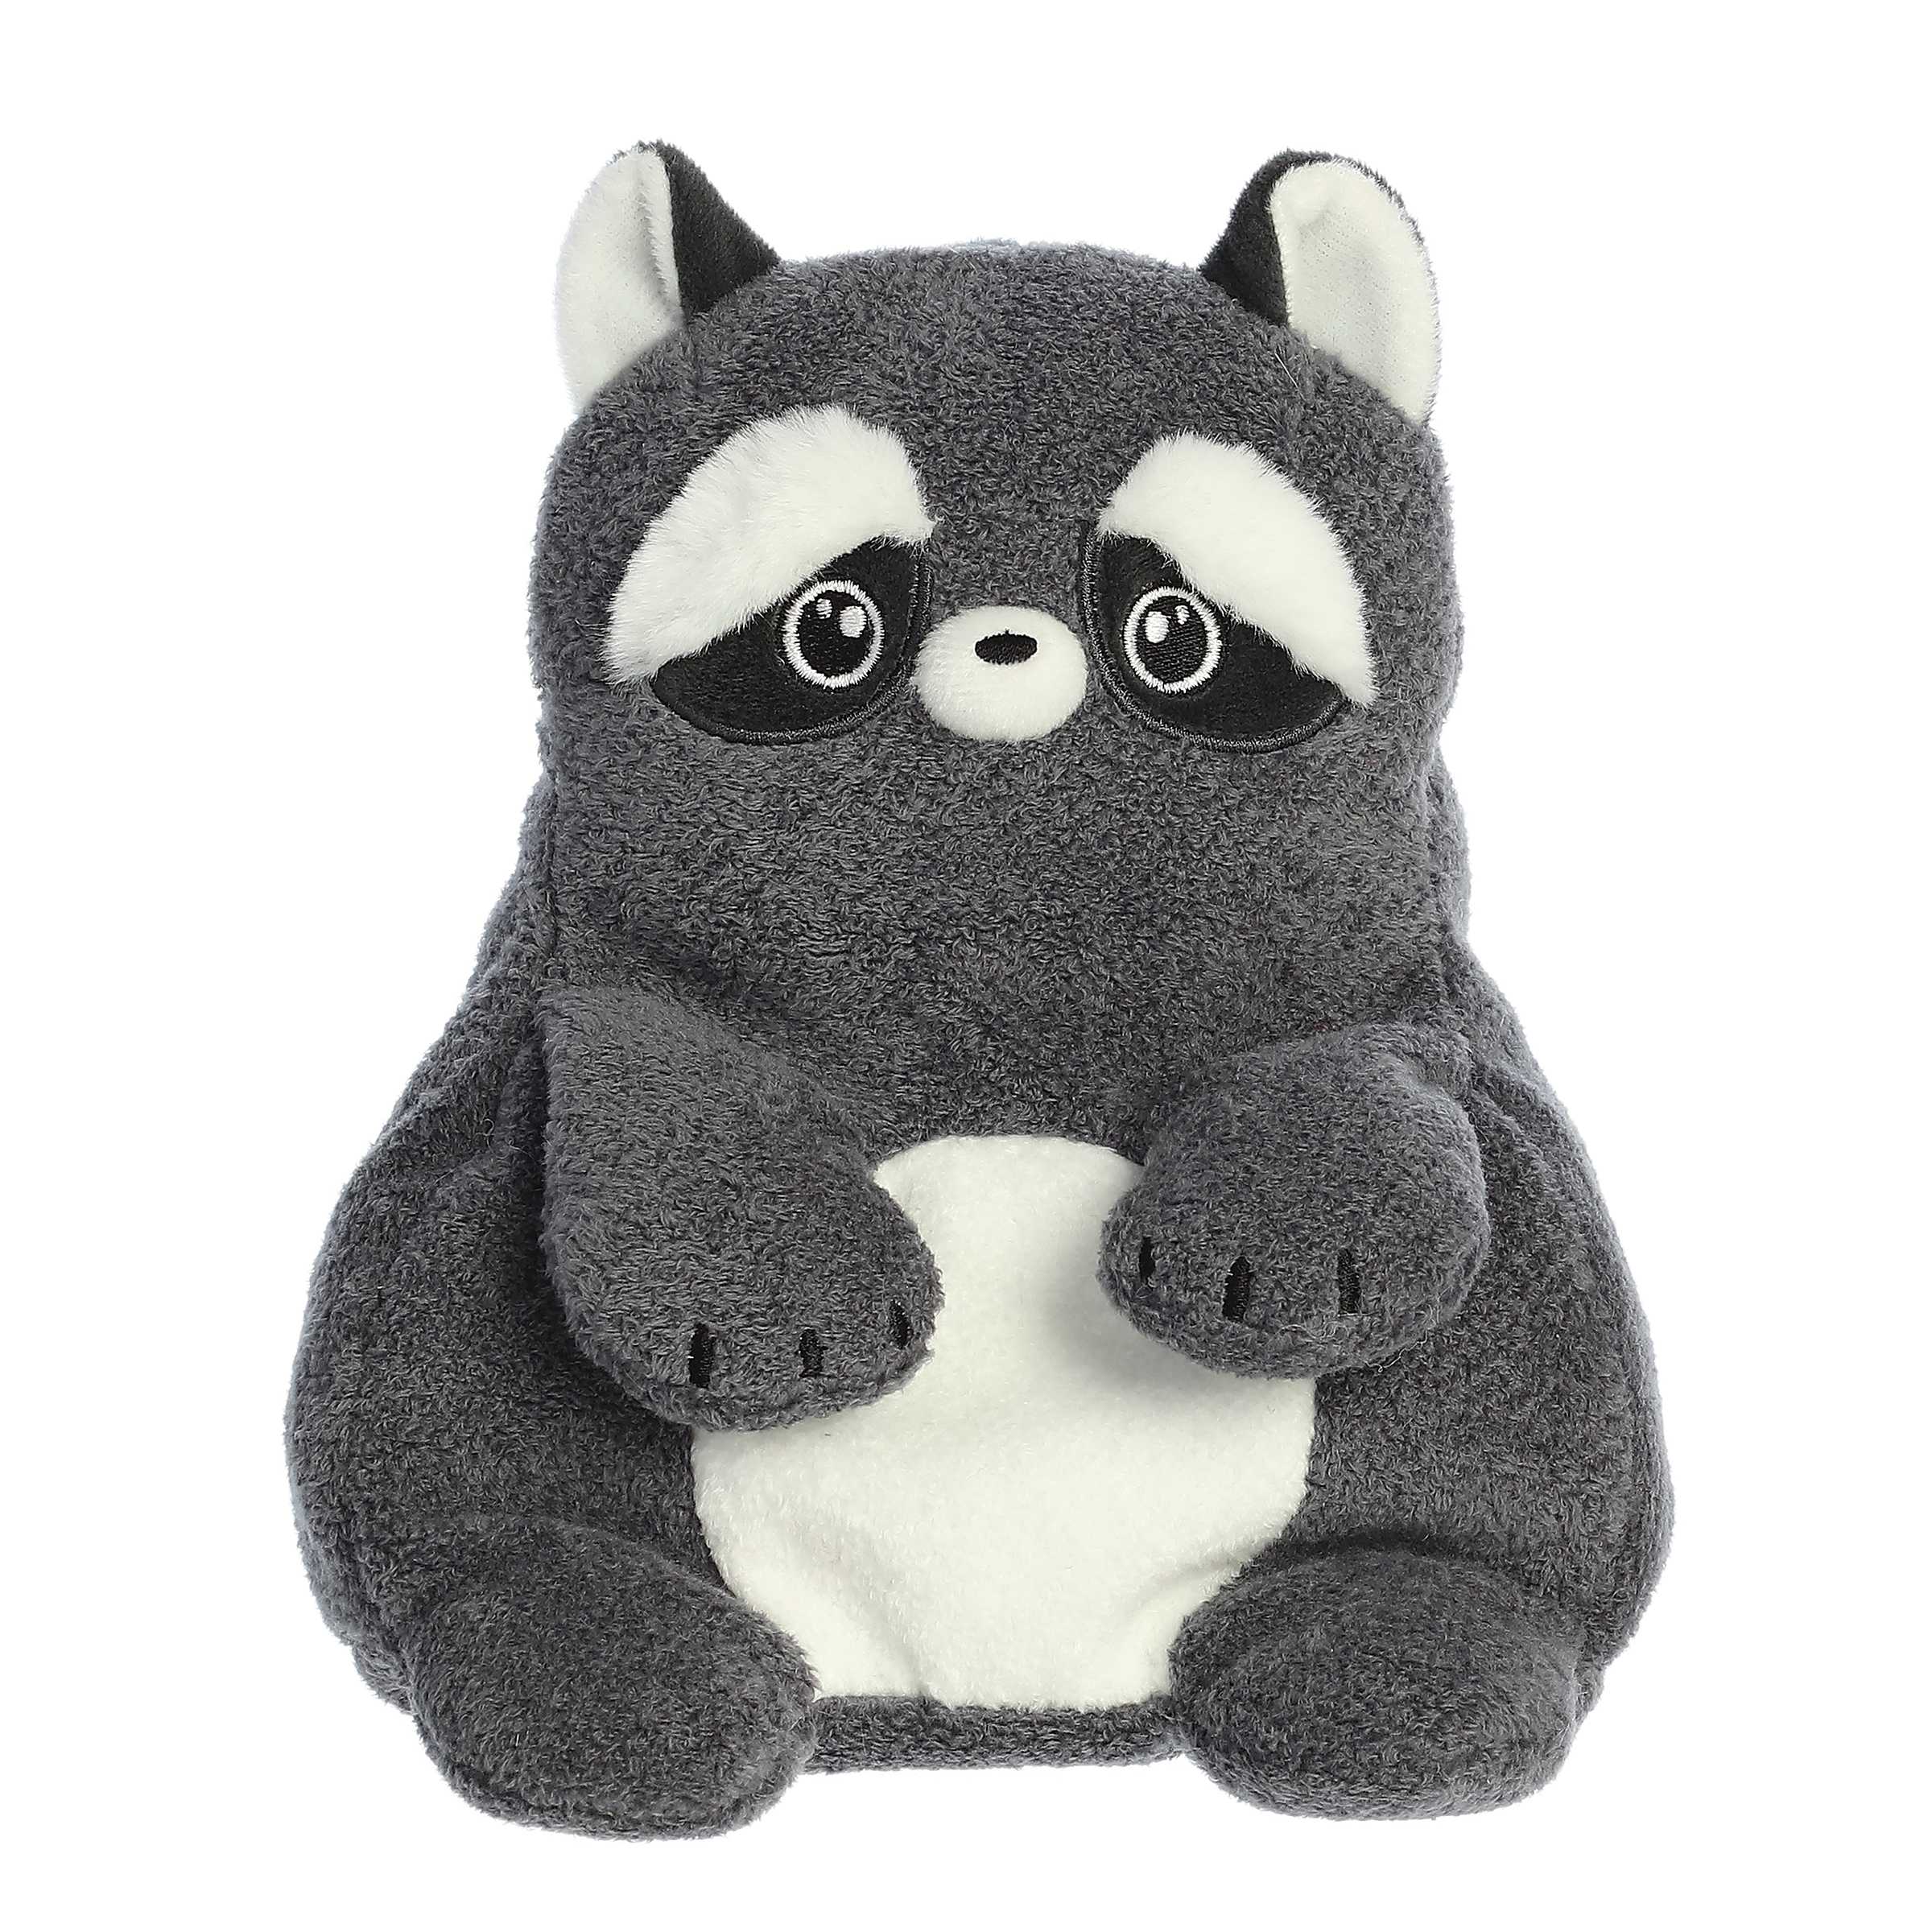 Riley Raccoon from Fluffles, a plush with soft fur and engaging eyes, perfect for soothing play and lasting joy.